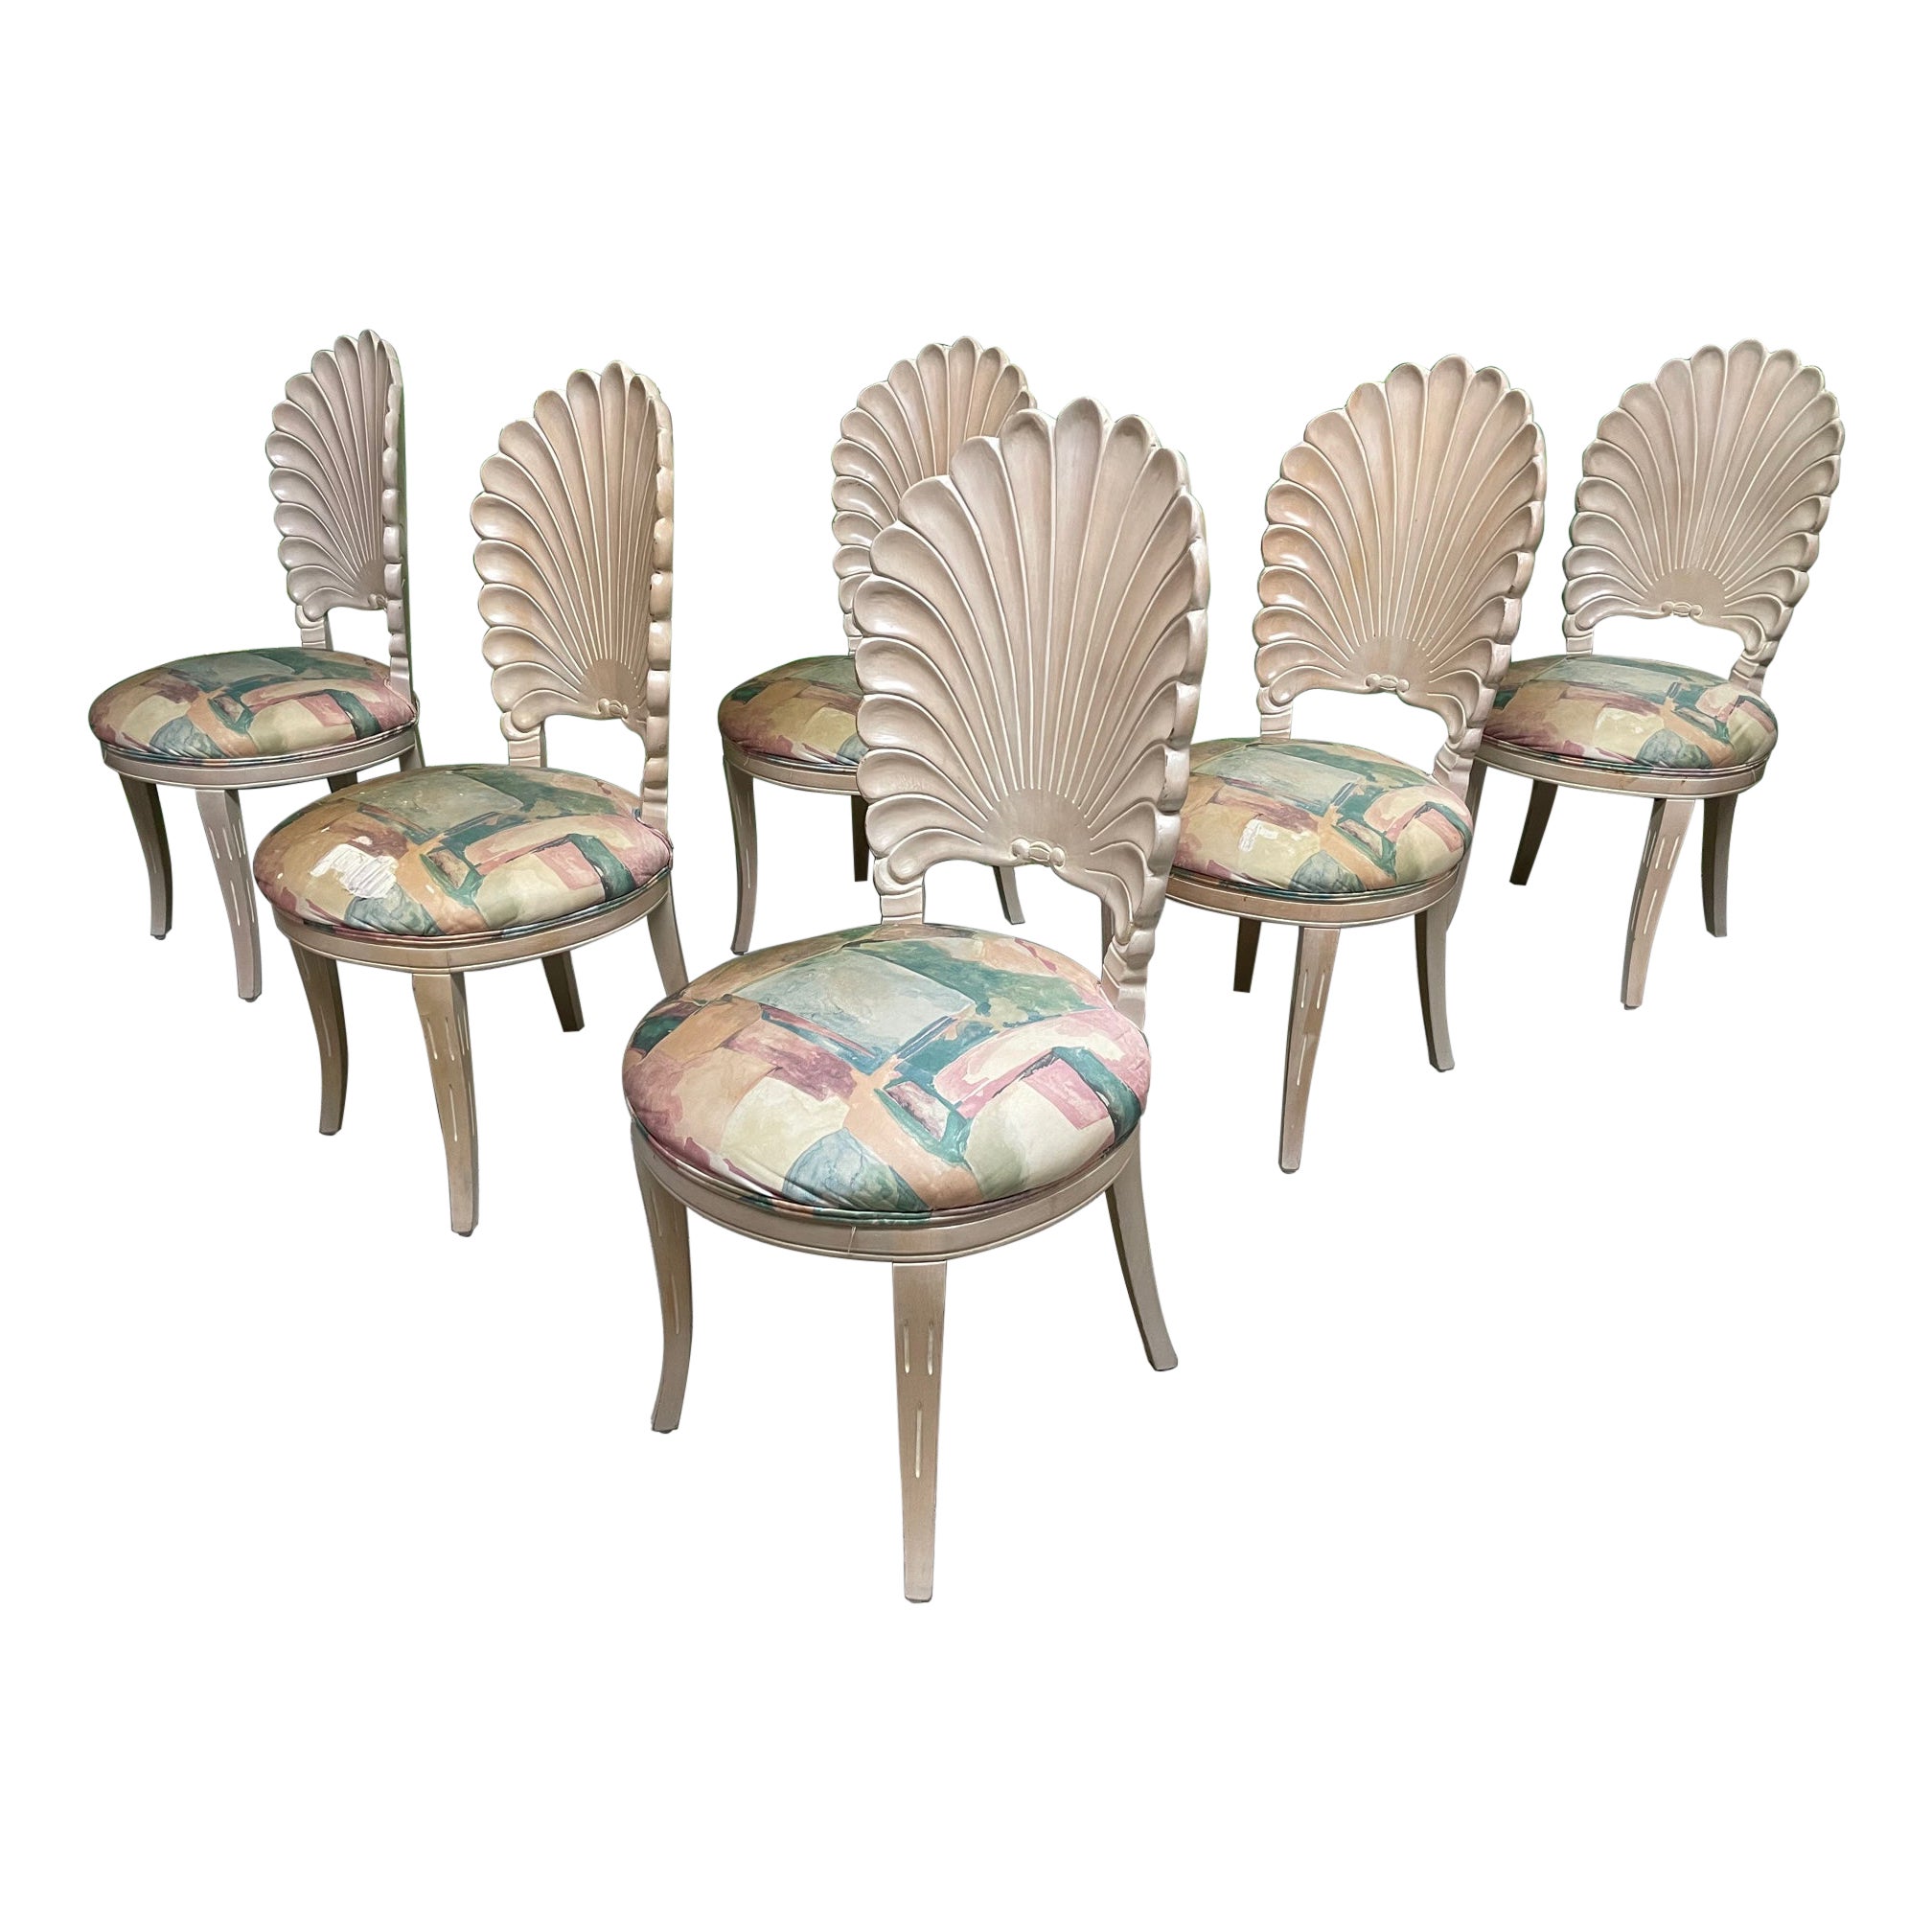 Venetian Grotto Style Shell Back Dining Chairs, Set of 6